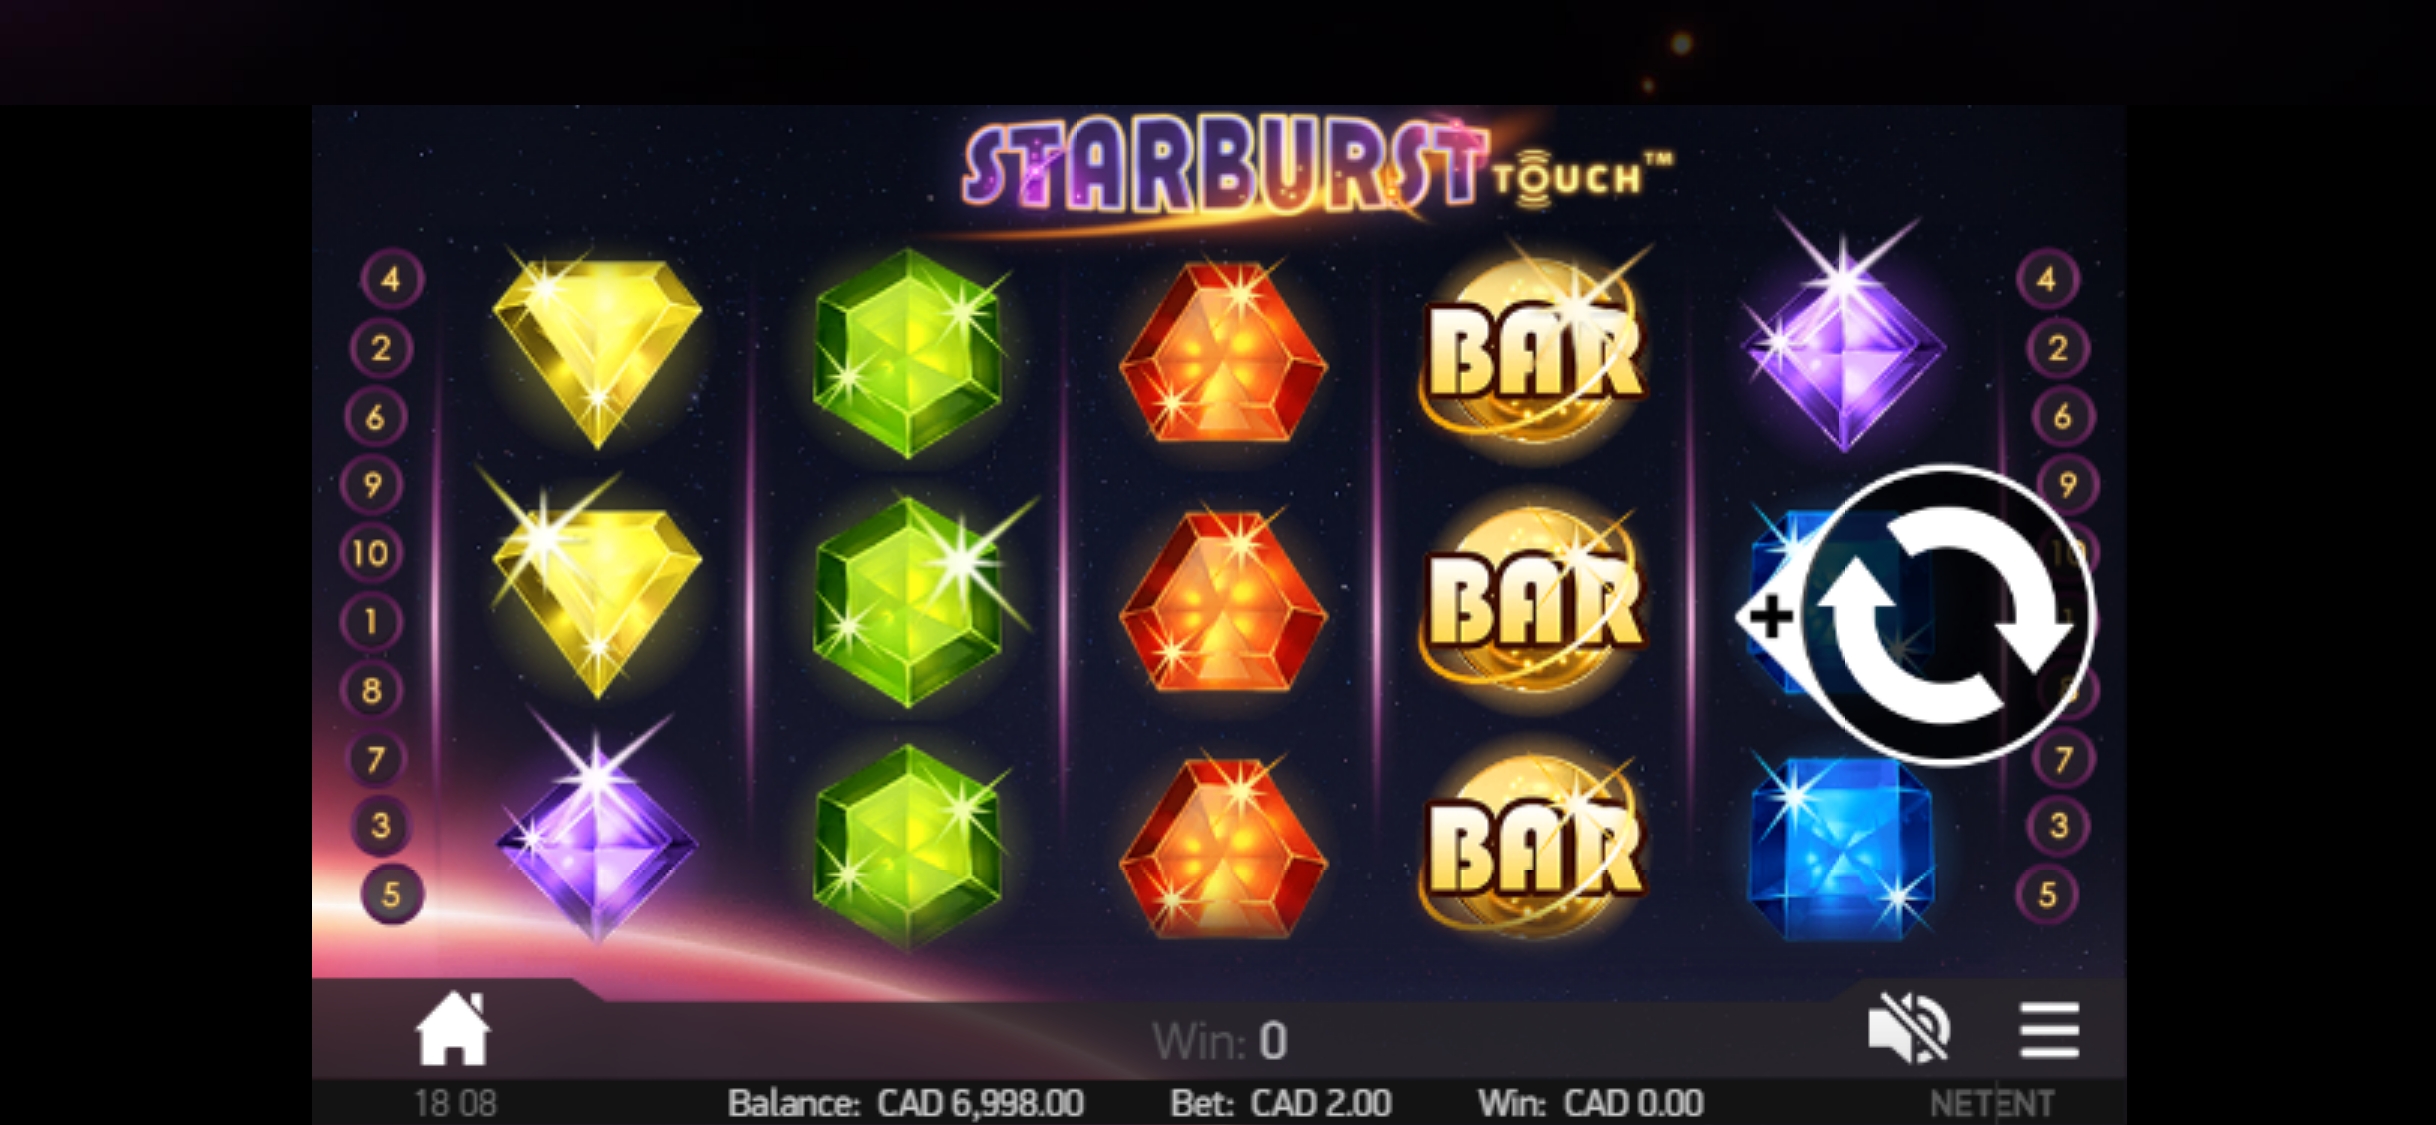 WildSlots Casino Mobile Slot Games Review